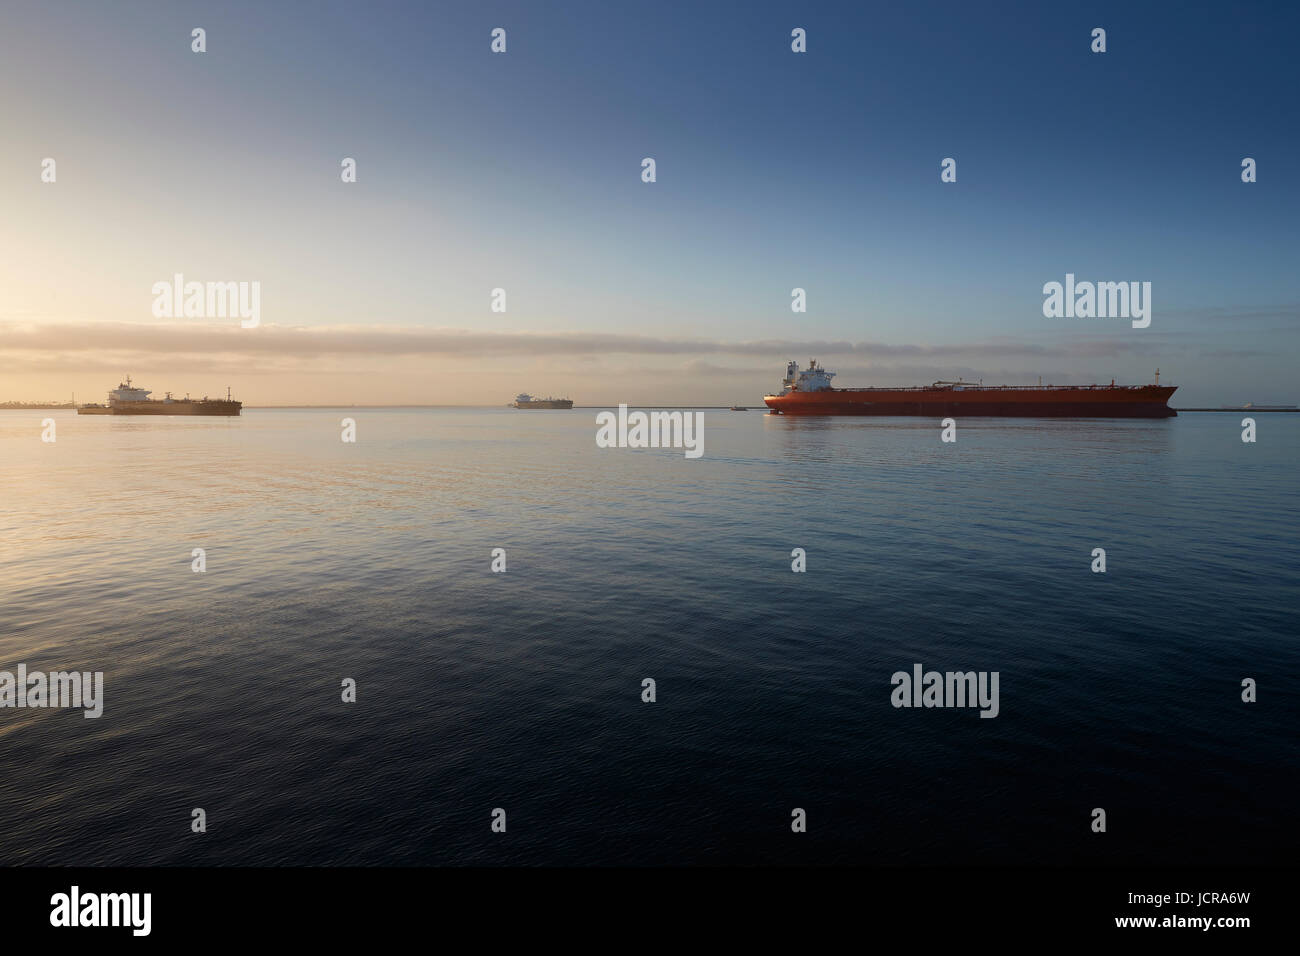 Supertankers (Very Large Crude Oil Carriers), At Anchor In Long Beach Harbor, California, USA. Stock Photo